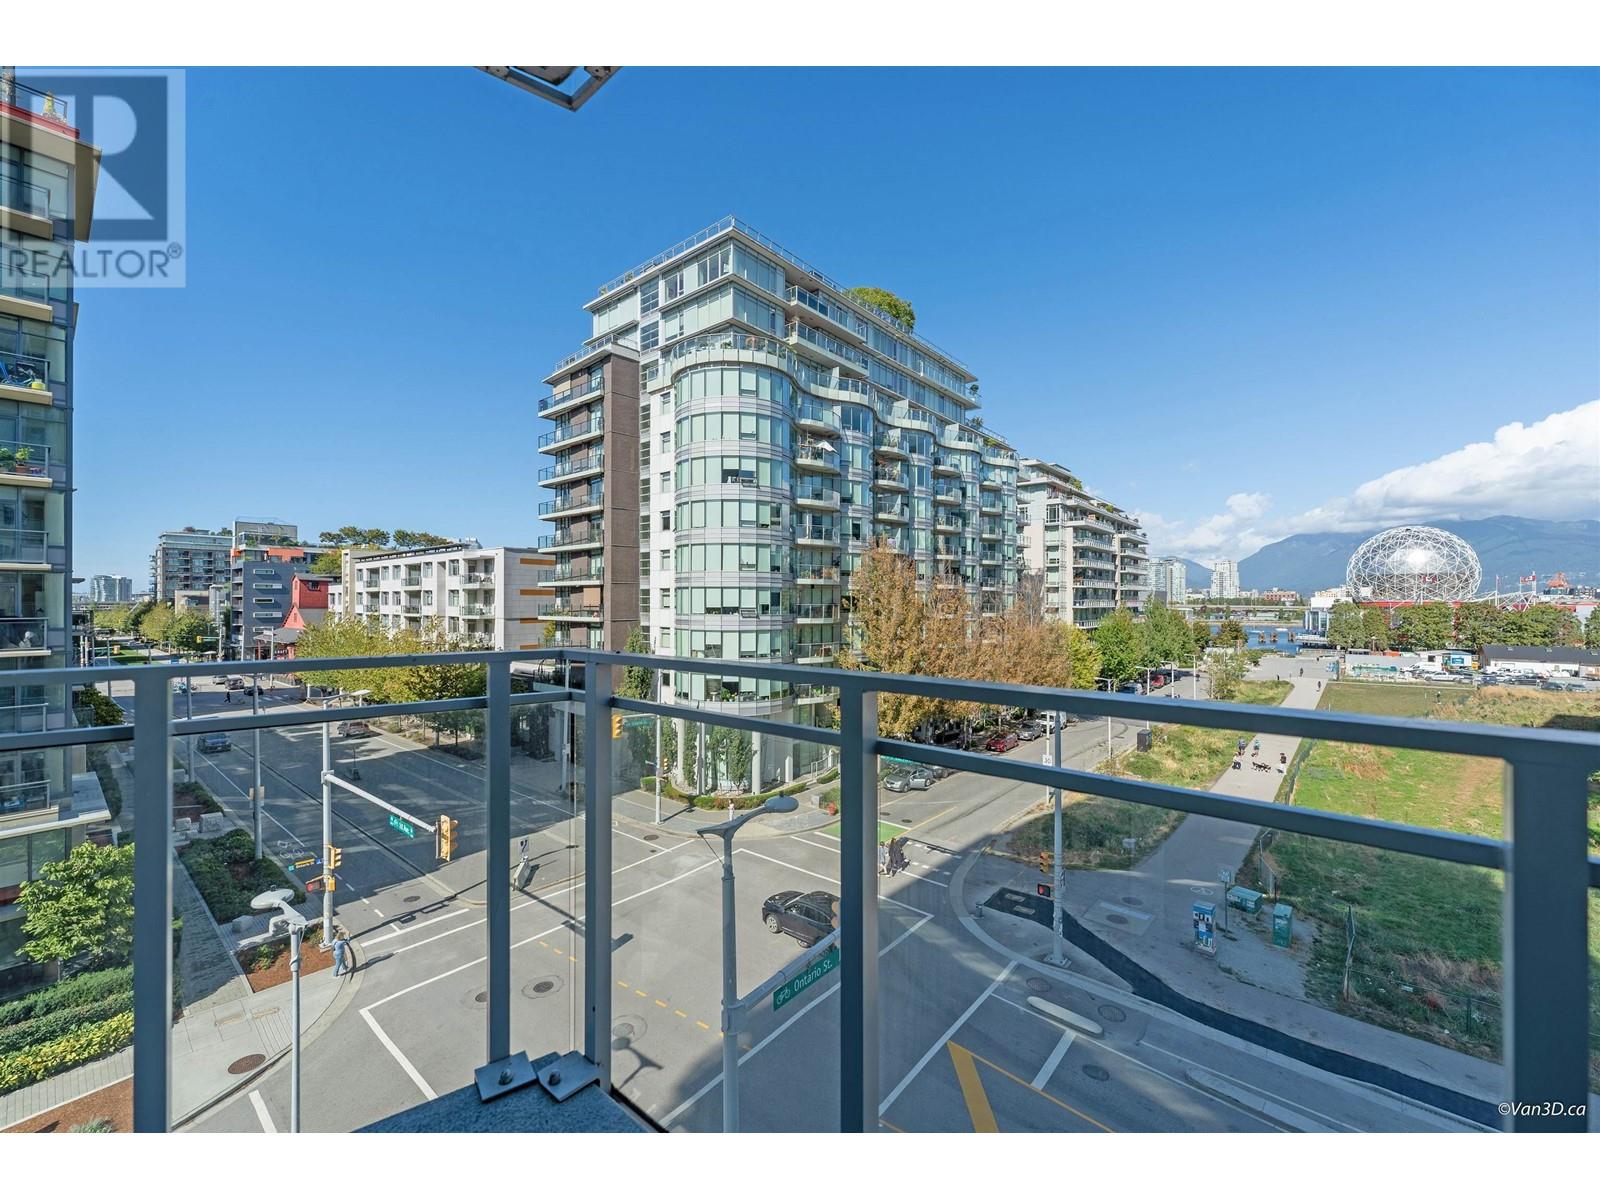 Listing Picture 3 of 20 : 506 1708 ONTARIO STREET, Vancouver / 溫哥華 - 魯藝地產 Yvonne Lu Group - MLS Medallion Club Member